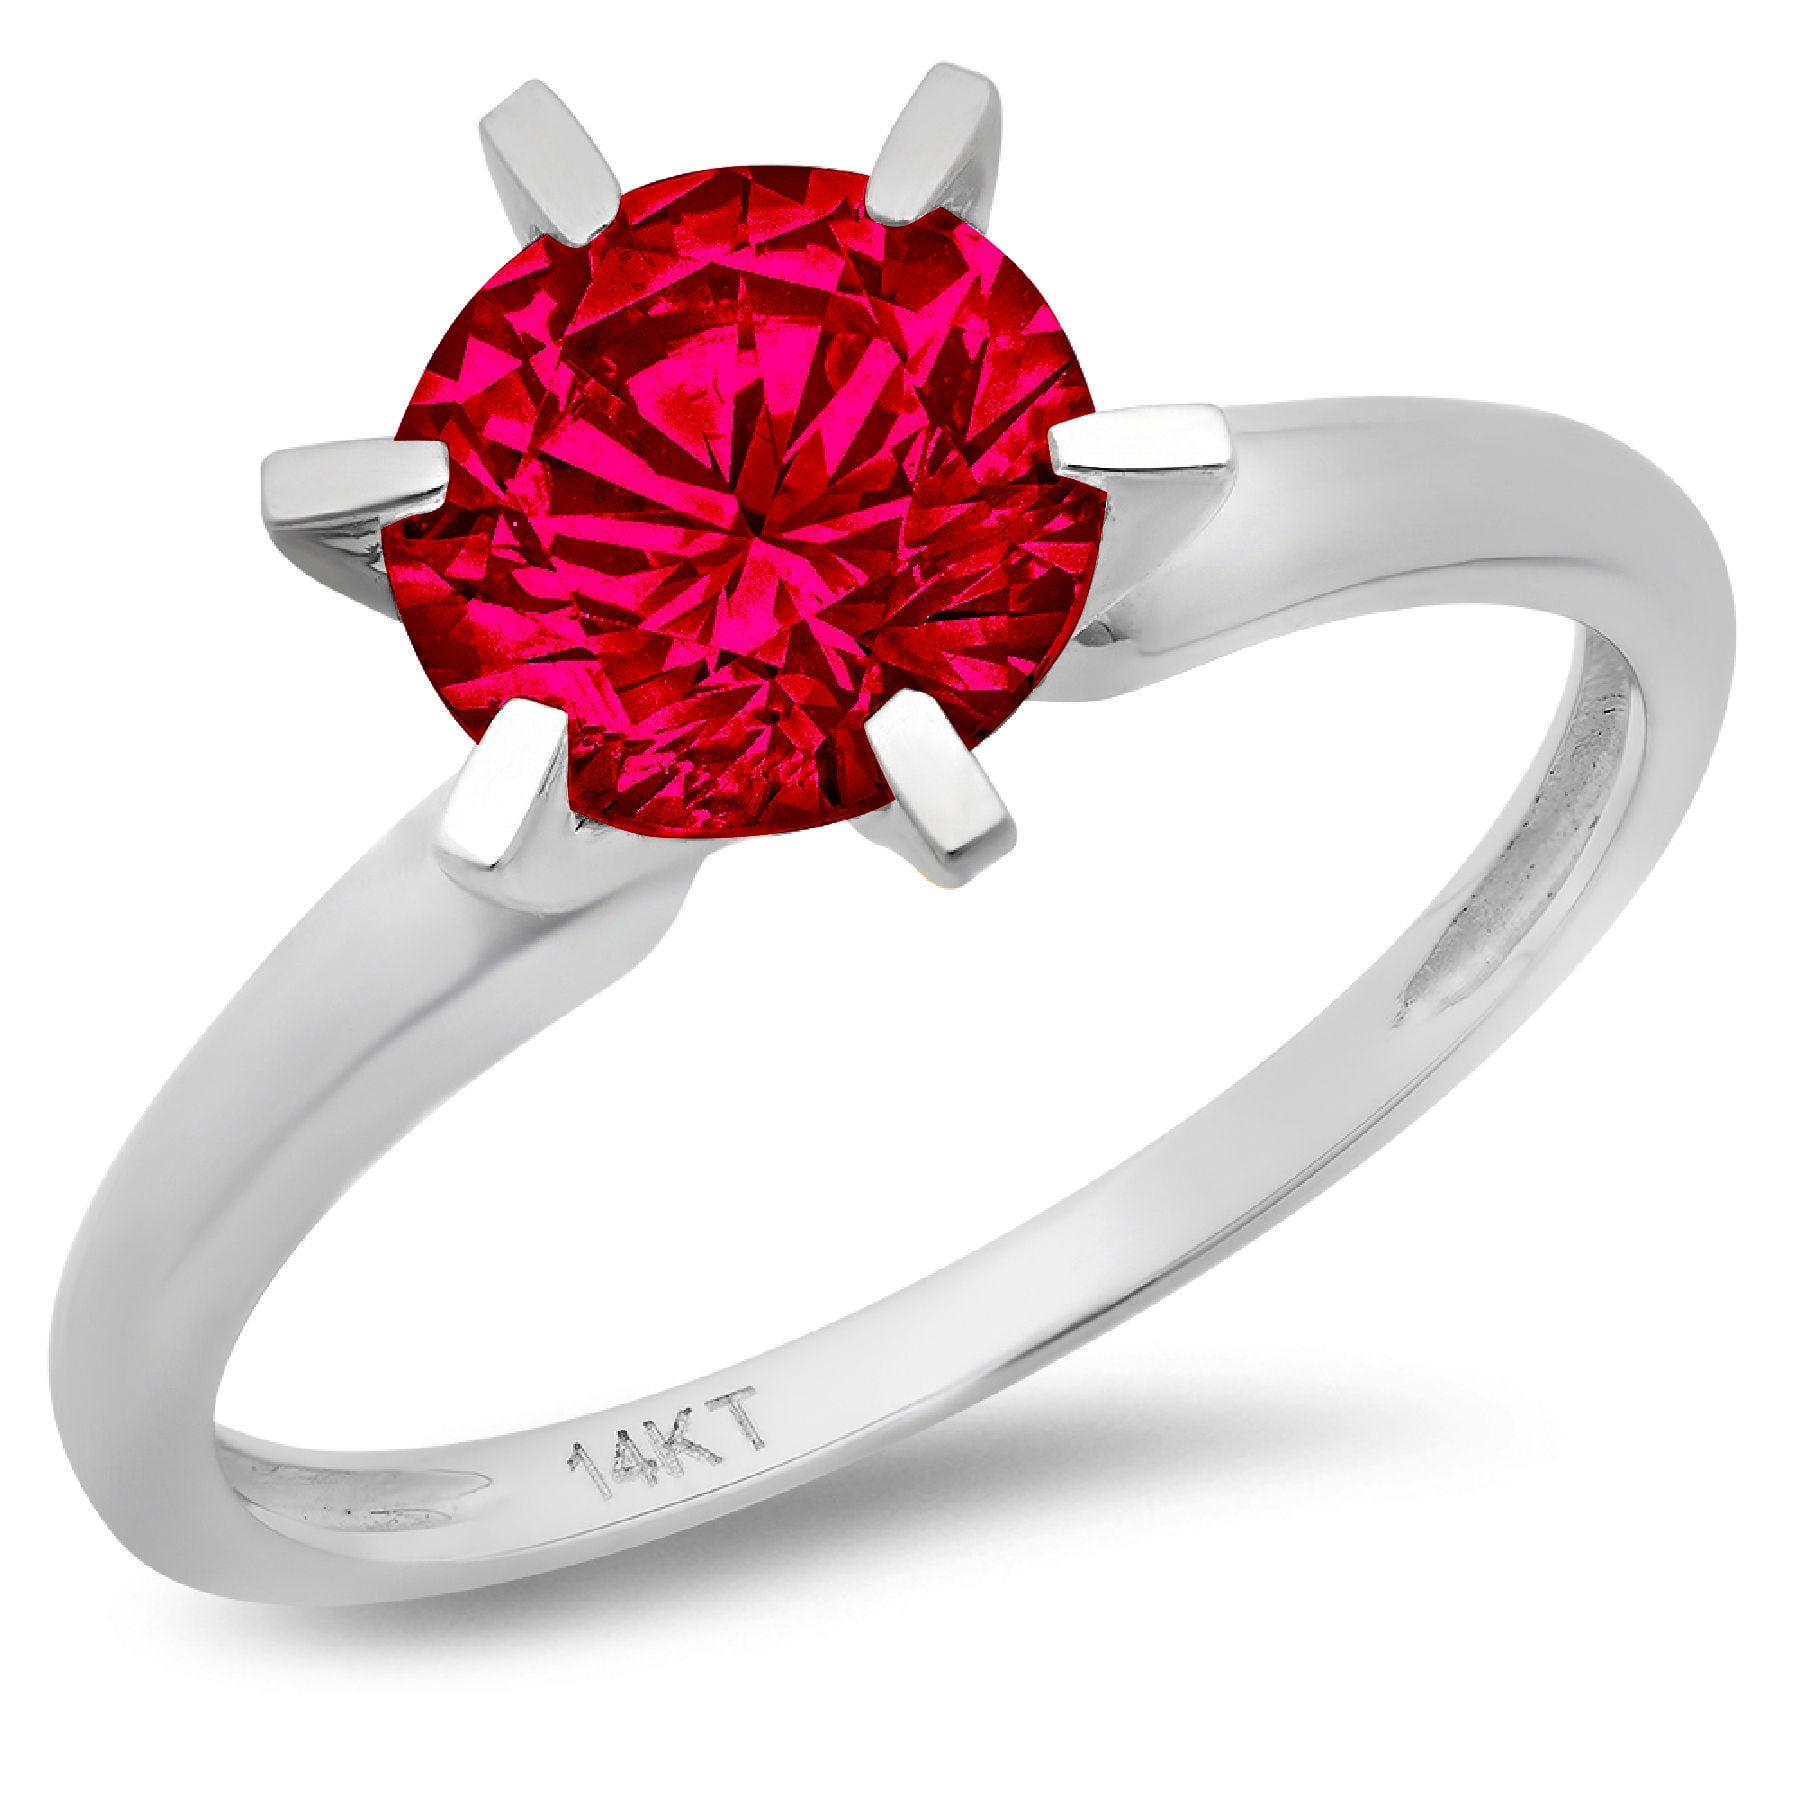 2.5 ct Brilliant Round Cut VVS1 Red Simulated Diamond Rose Solid 14k or 18k Gold Robotic Laser Engraved Handmade Anniversary Solitaire Ring